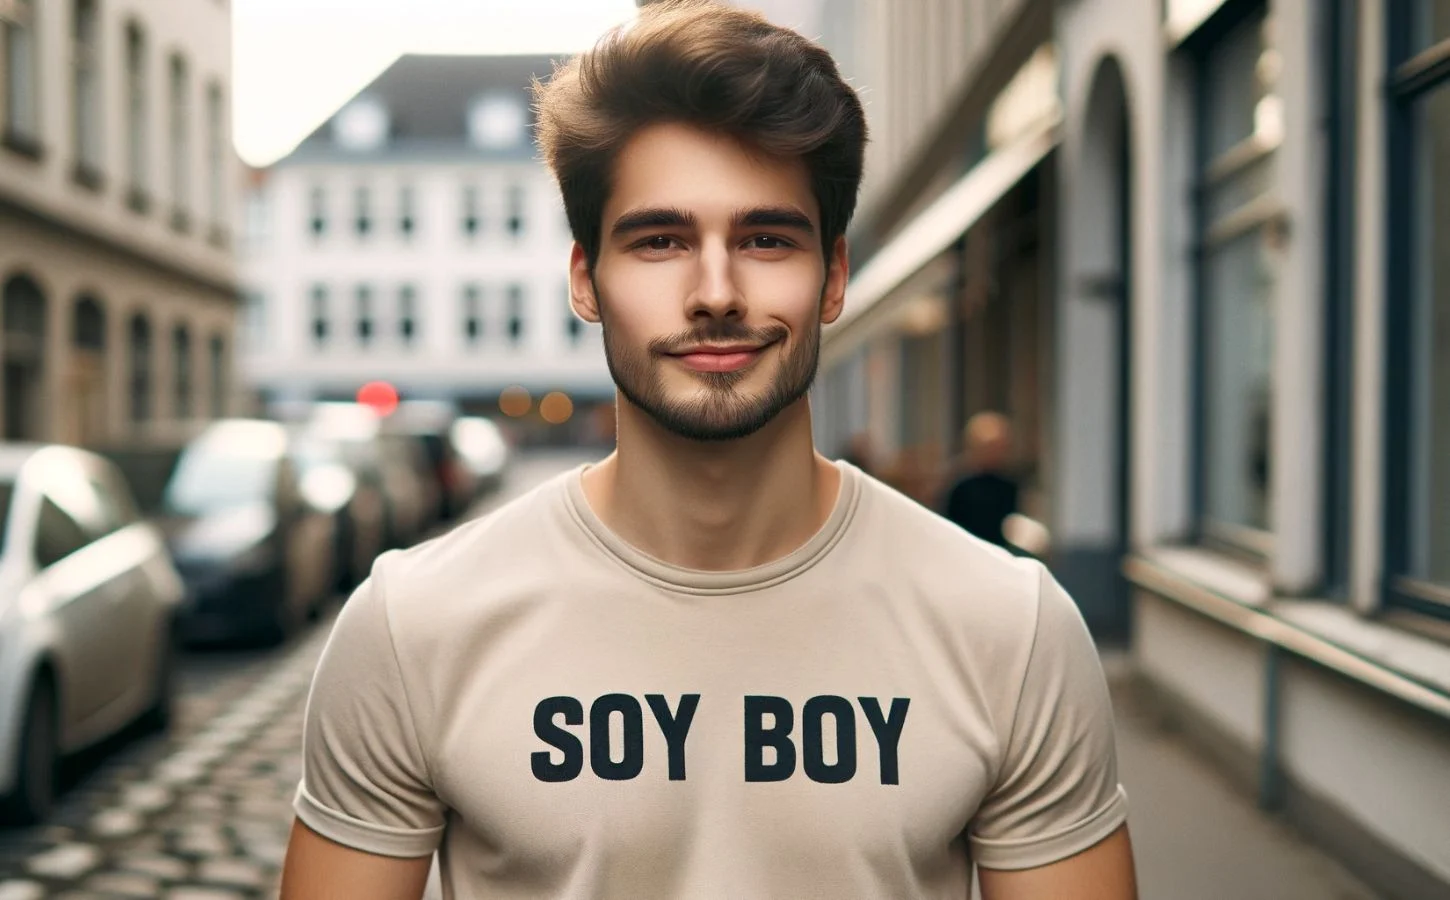 How to Apply Soyboy in Different Circumstances